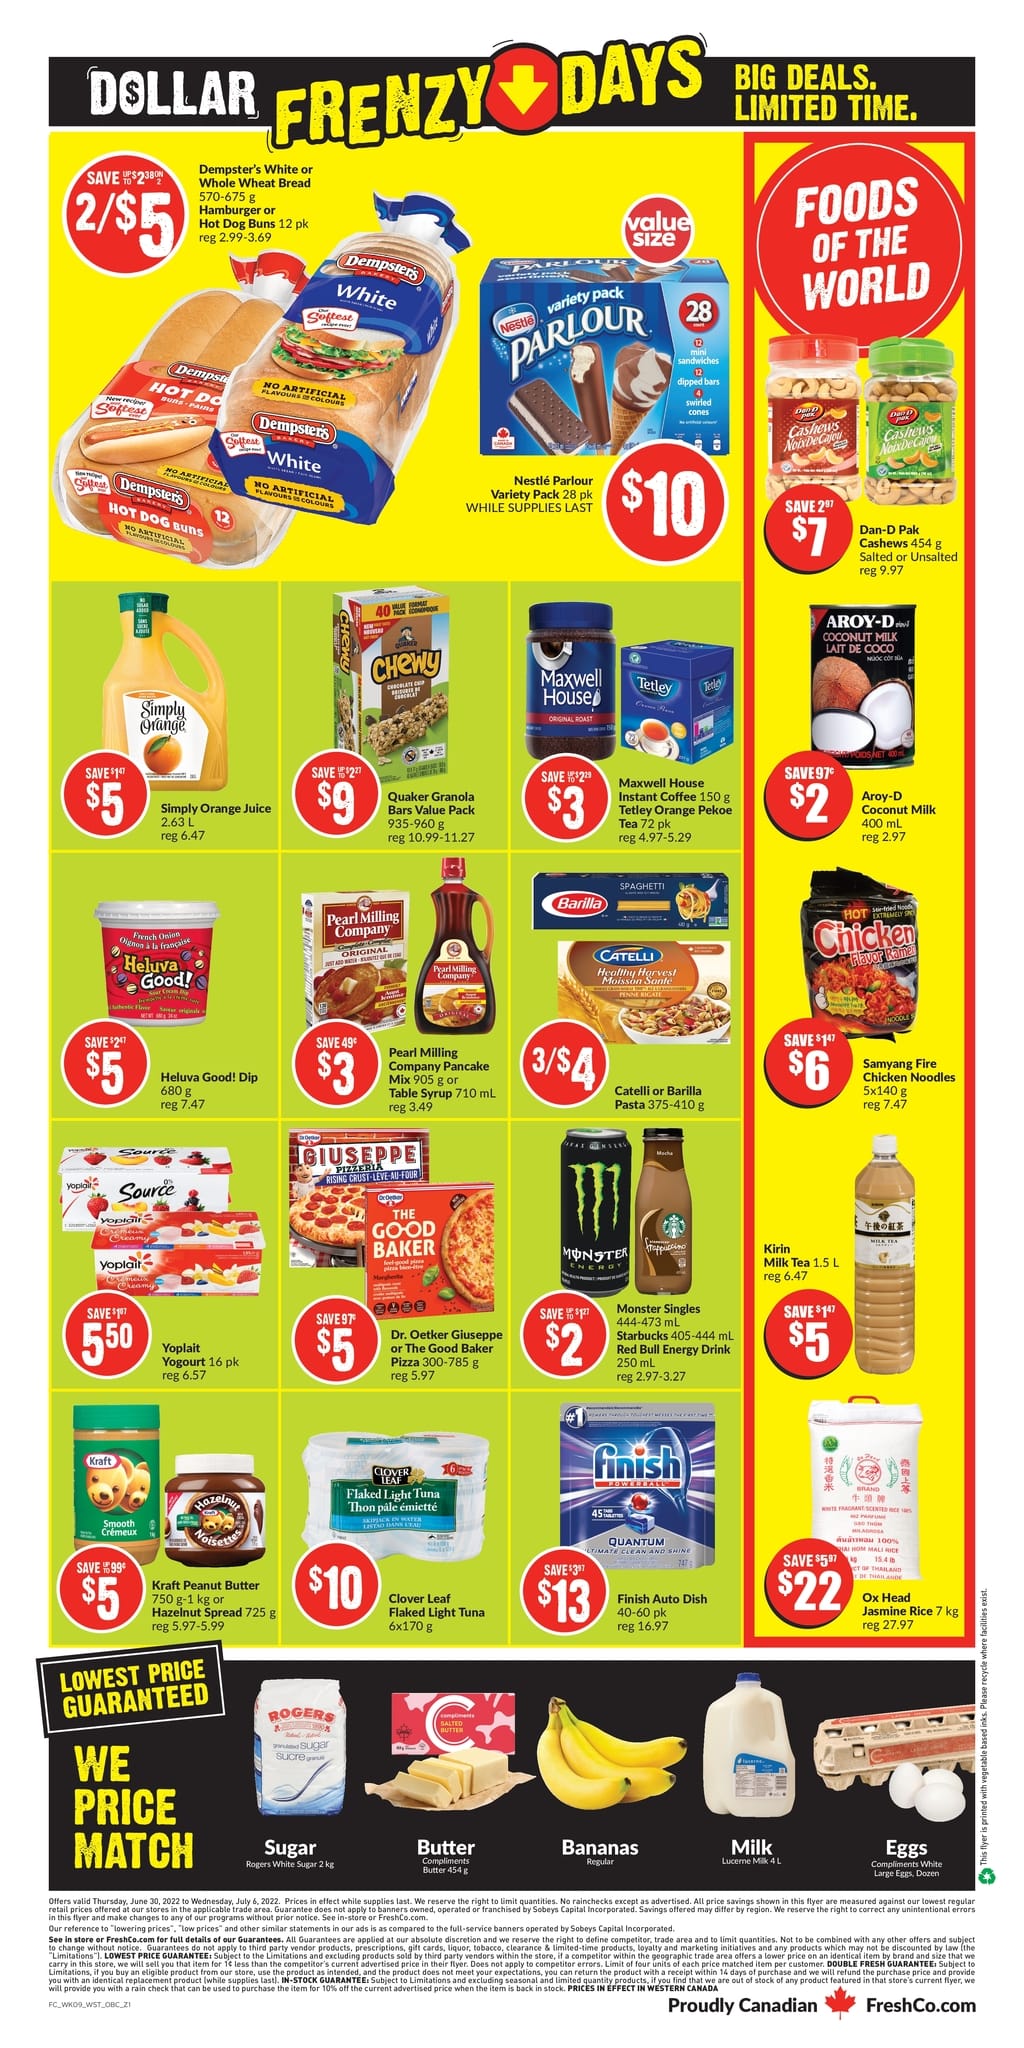 FreshCo British Columbia - Weekly Flyer Specials - Page 4